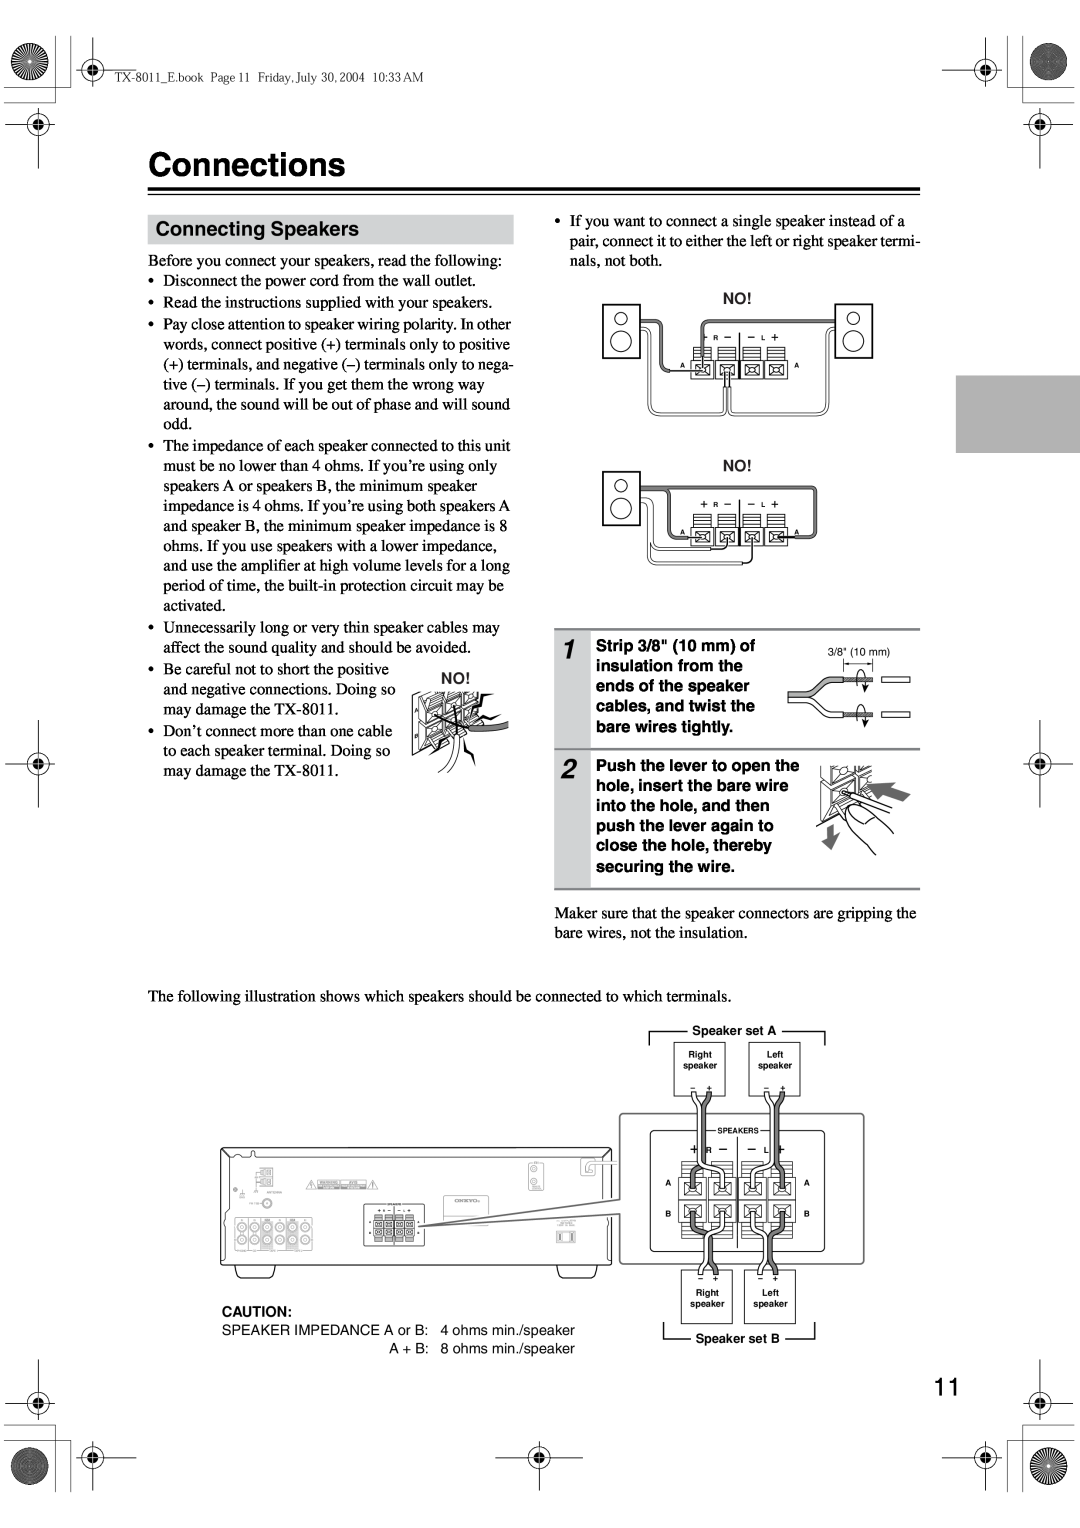 Onkyo TX-8011 instruction manual Connections, Connecting Speakers 